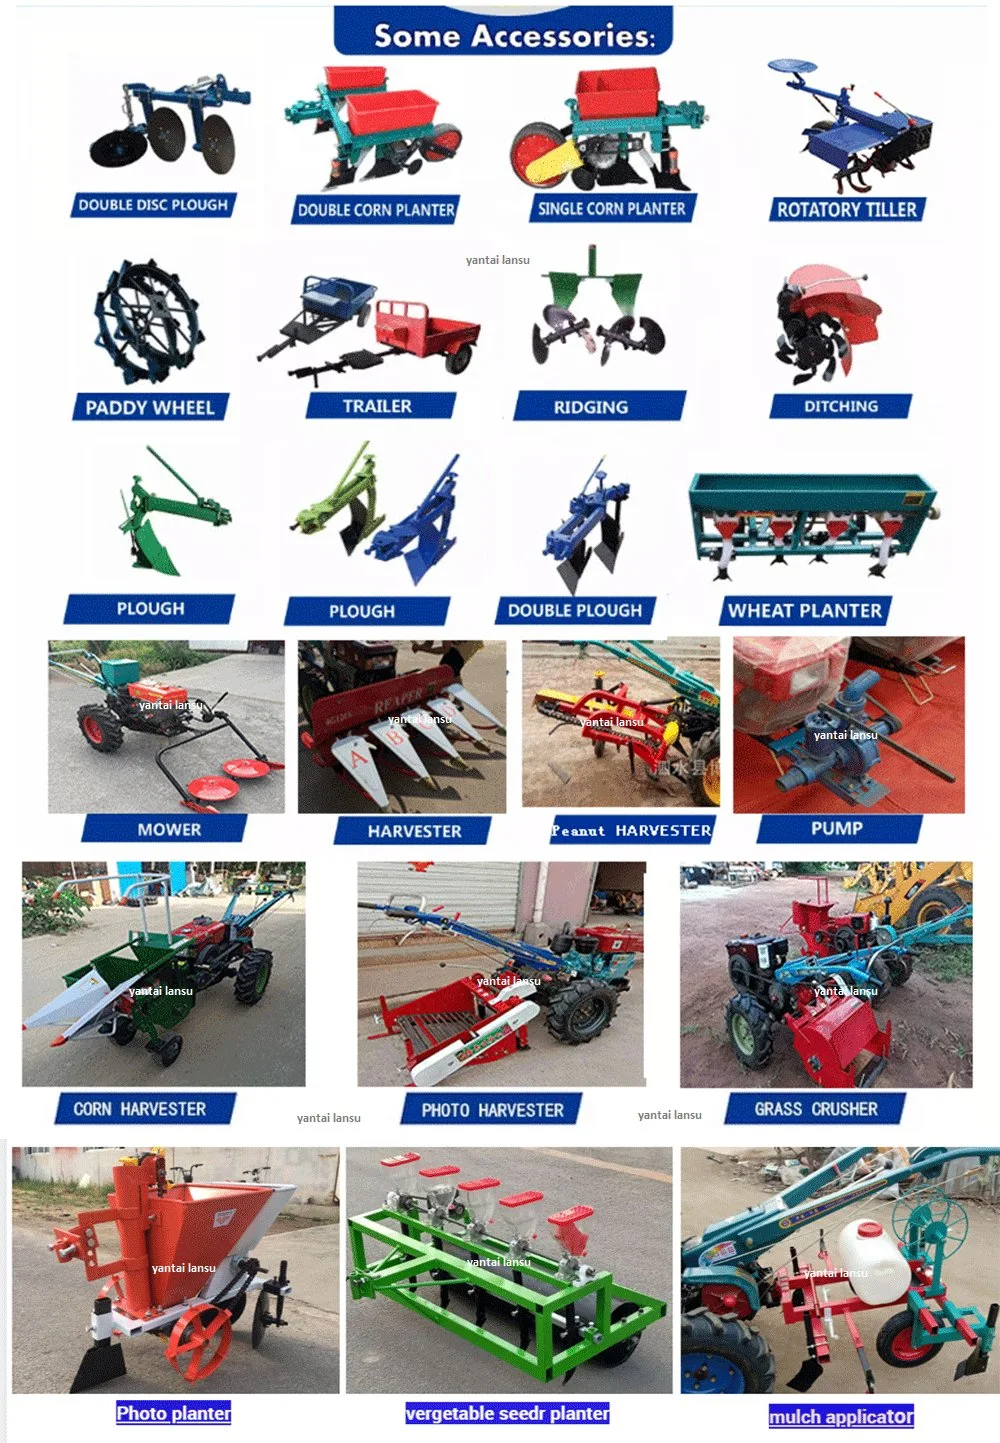 Walking Tractor with High Quality